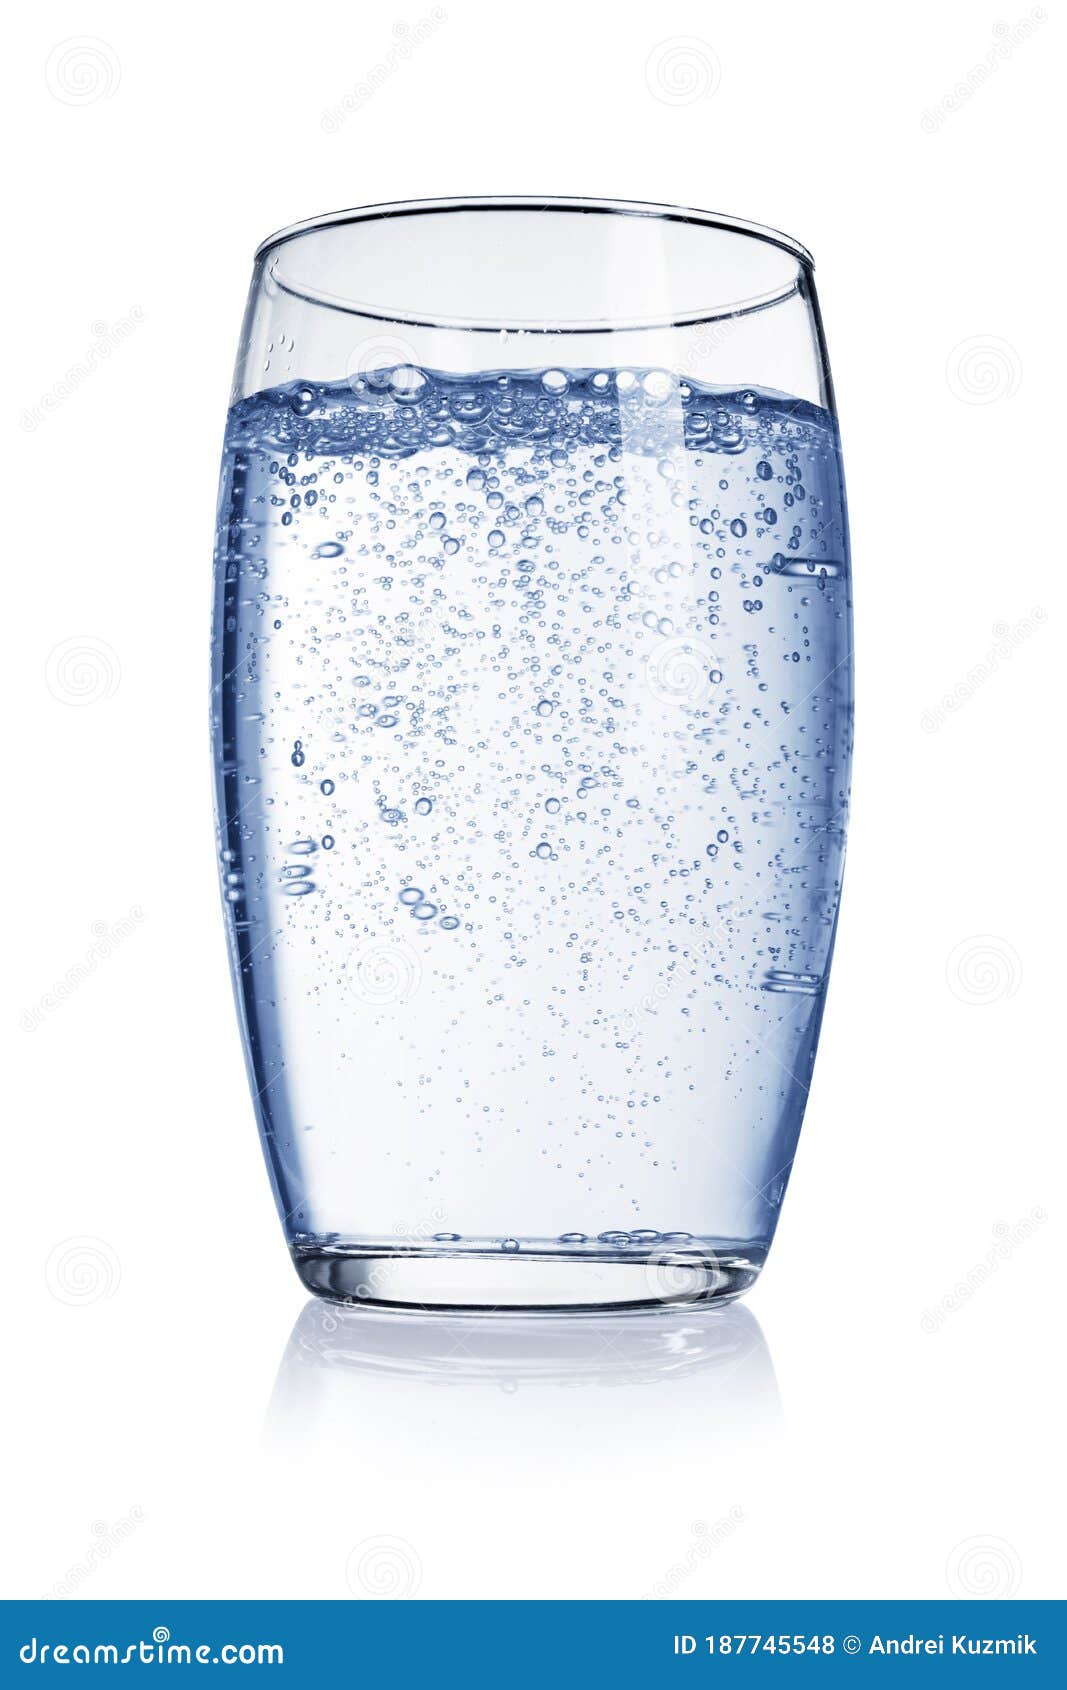 Glass of water with bubbles of gas isolated on white background. Glass of soda, carbonated, sparkling water with bubbles of gas isolated on white background